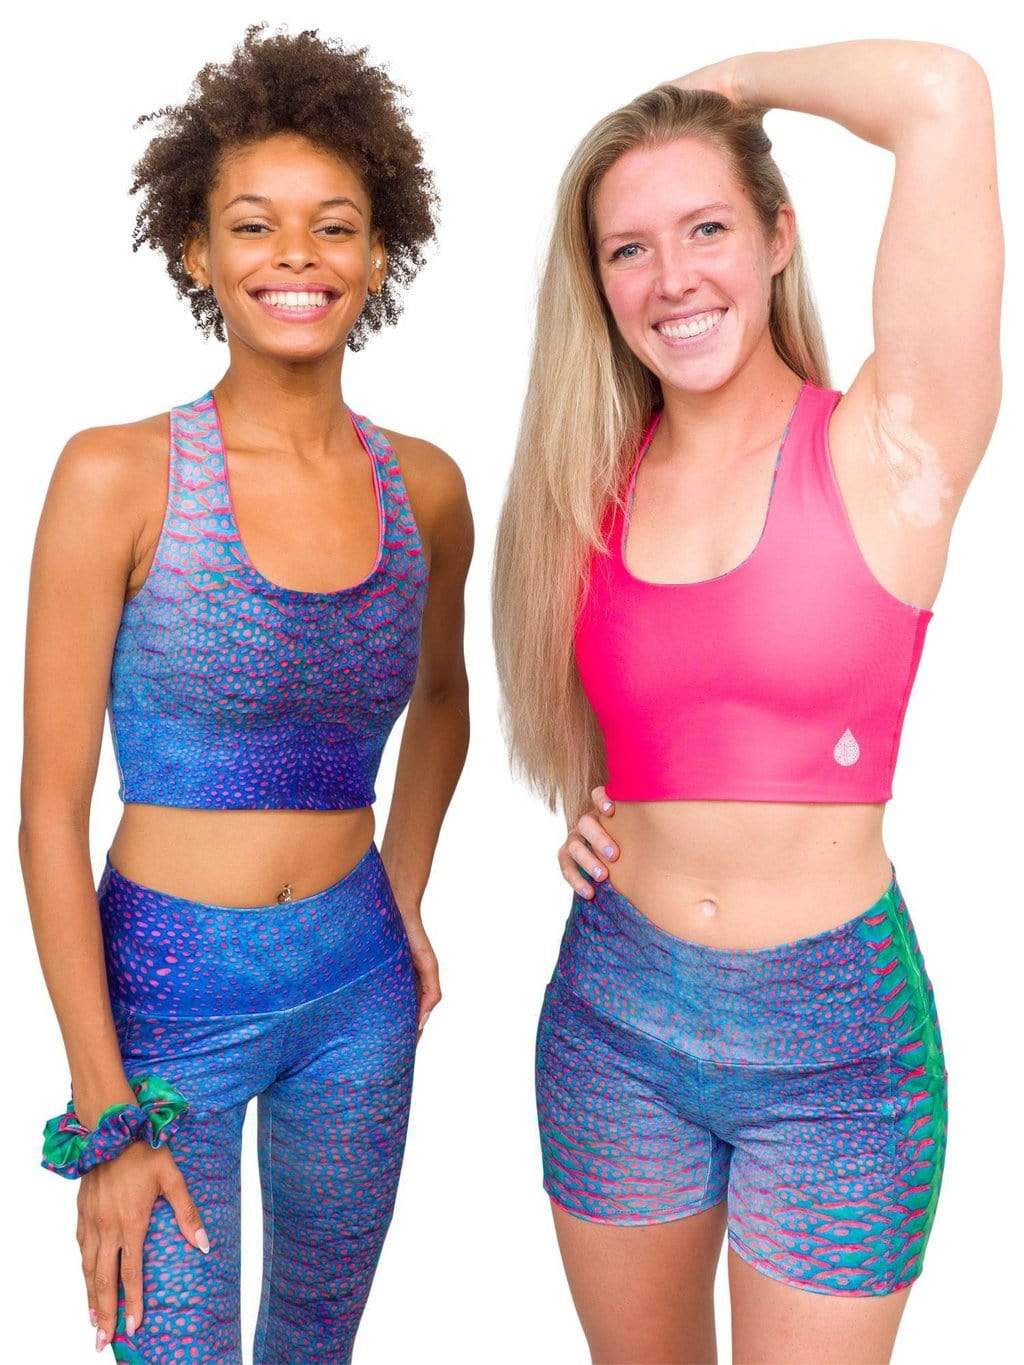 Model: Left: Syriah is a sea turtle conservation biologist. She is 5&#39;7&quot;, 111 lbs and is wearing an XS legging and top. Right: Leah is an Aquarium Biologist and is 5&#39;6&quot;, 140 lbs, 36B and is wearing a size M short and S top.